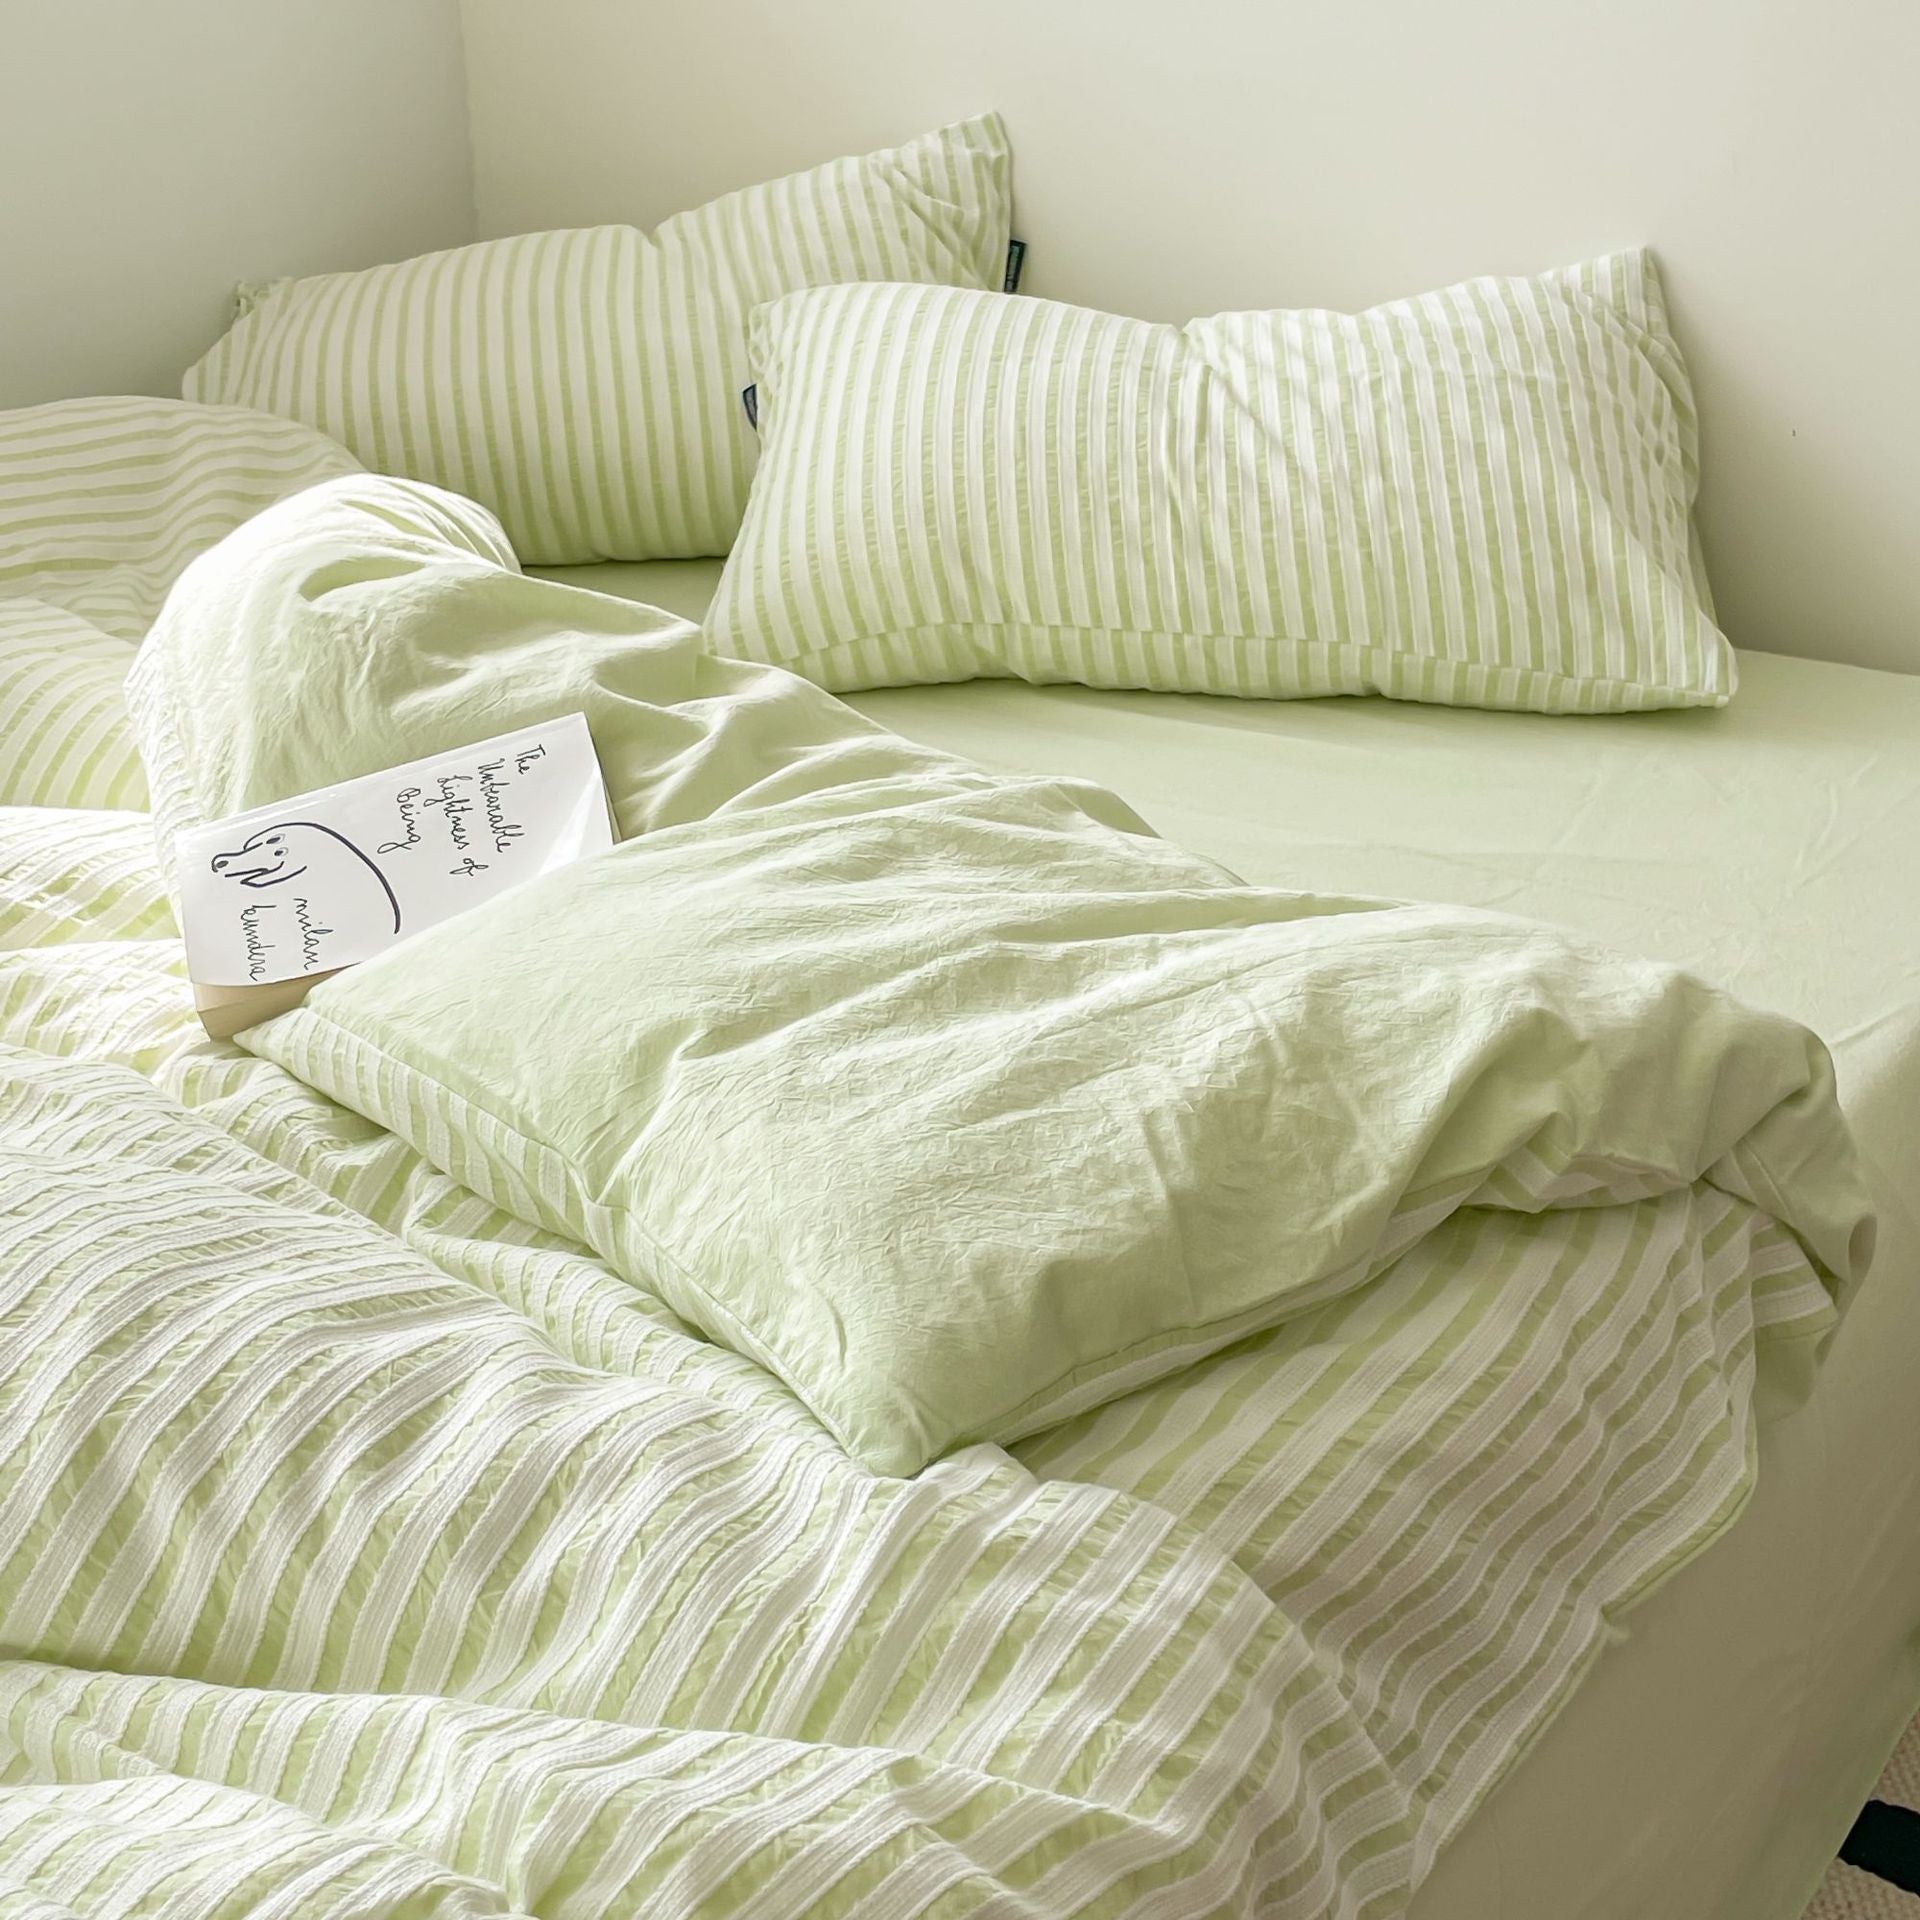 3D Simple Striped Cotton Bedding Set with Enzyme Washed Finish